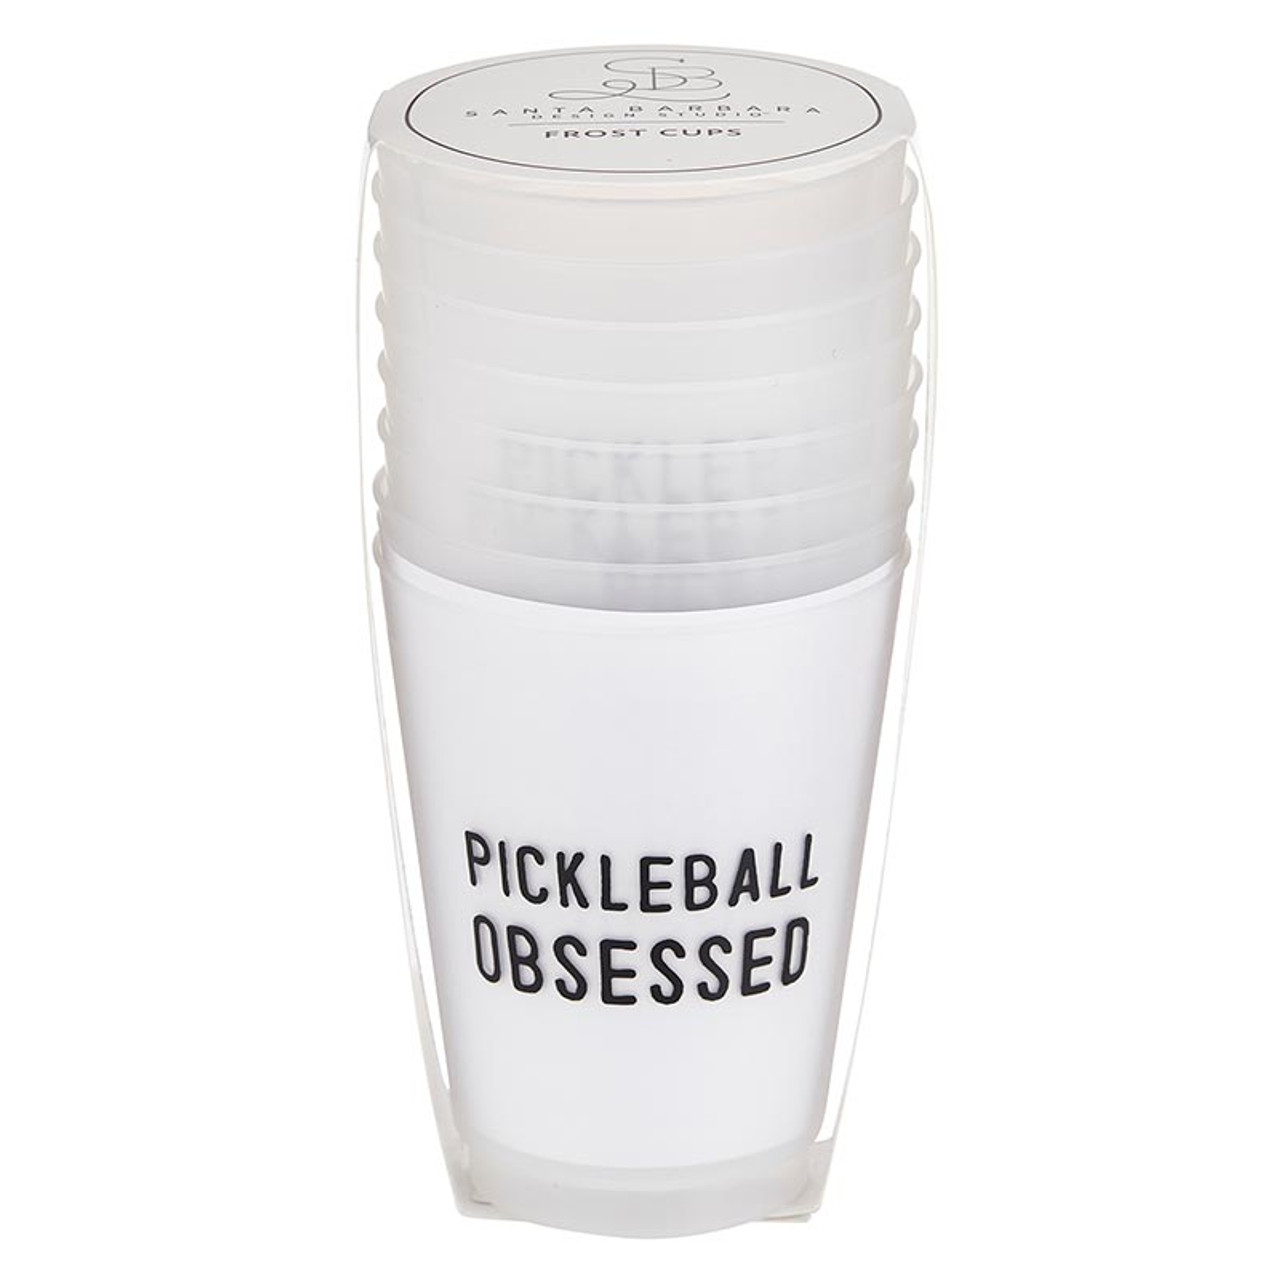 Frosted Roadie Cups Holiday Deisgns Bulk Printing